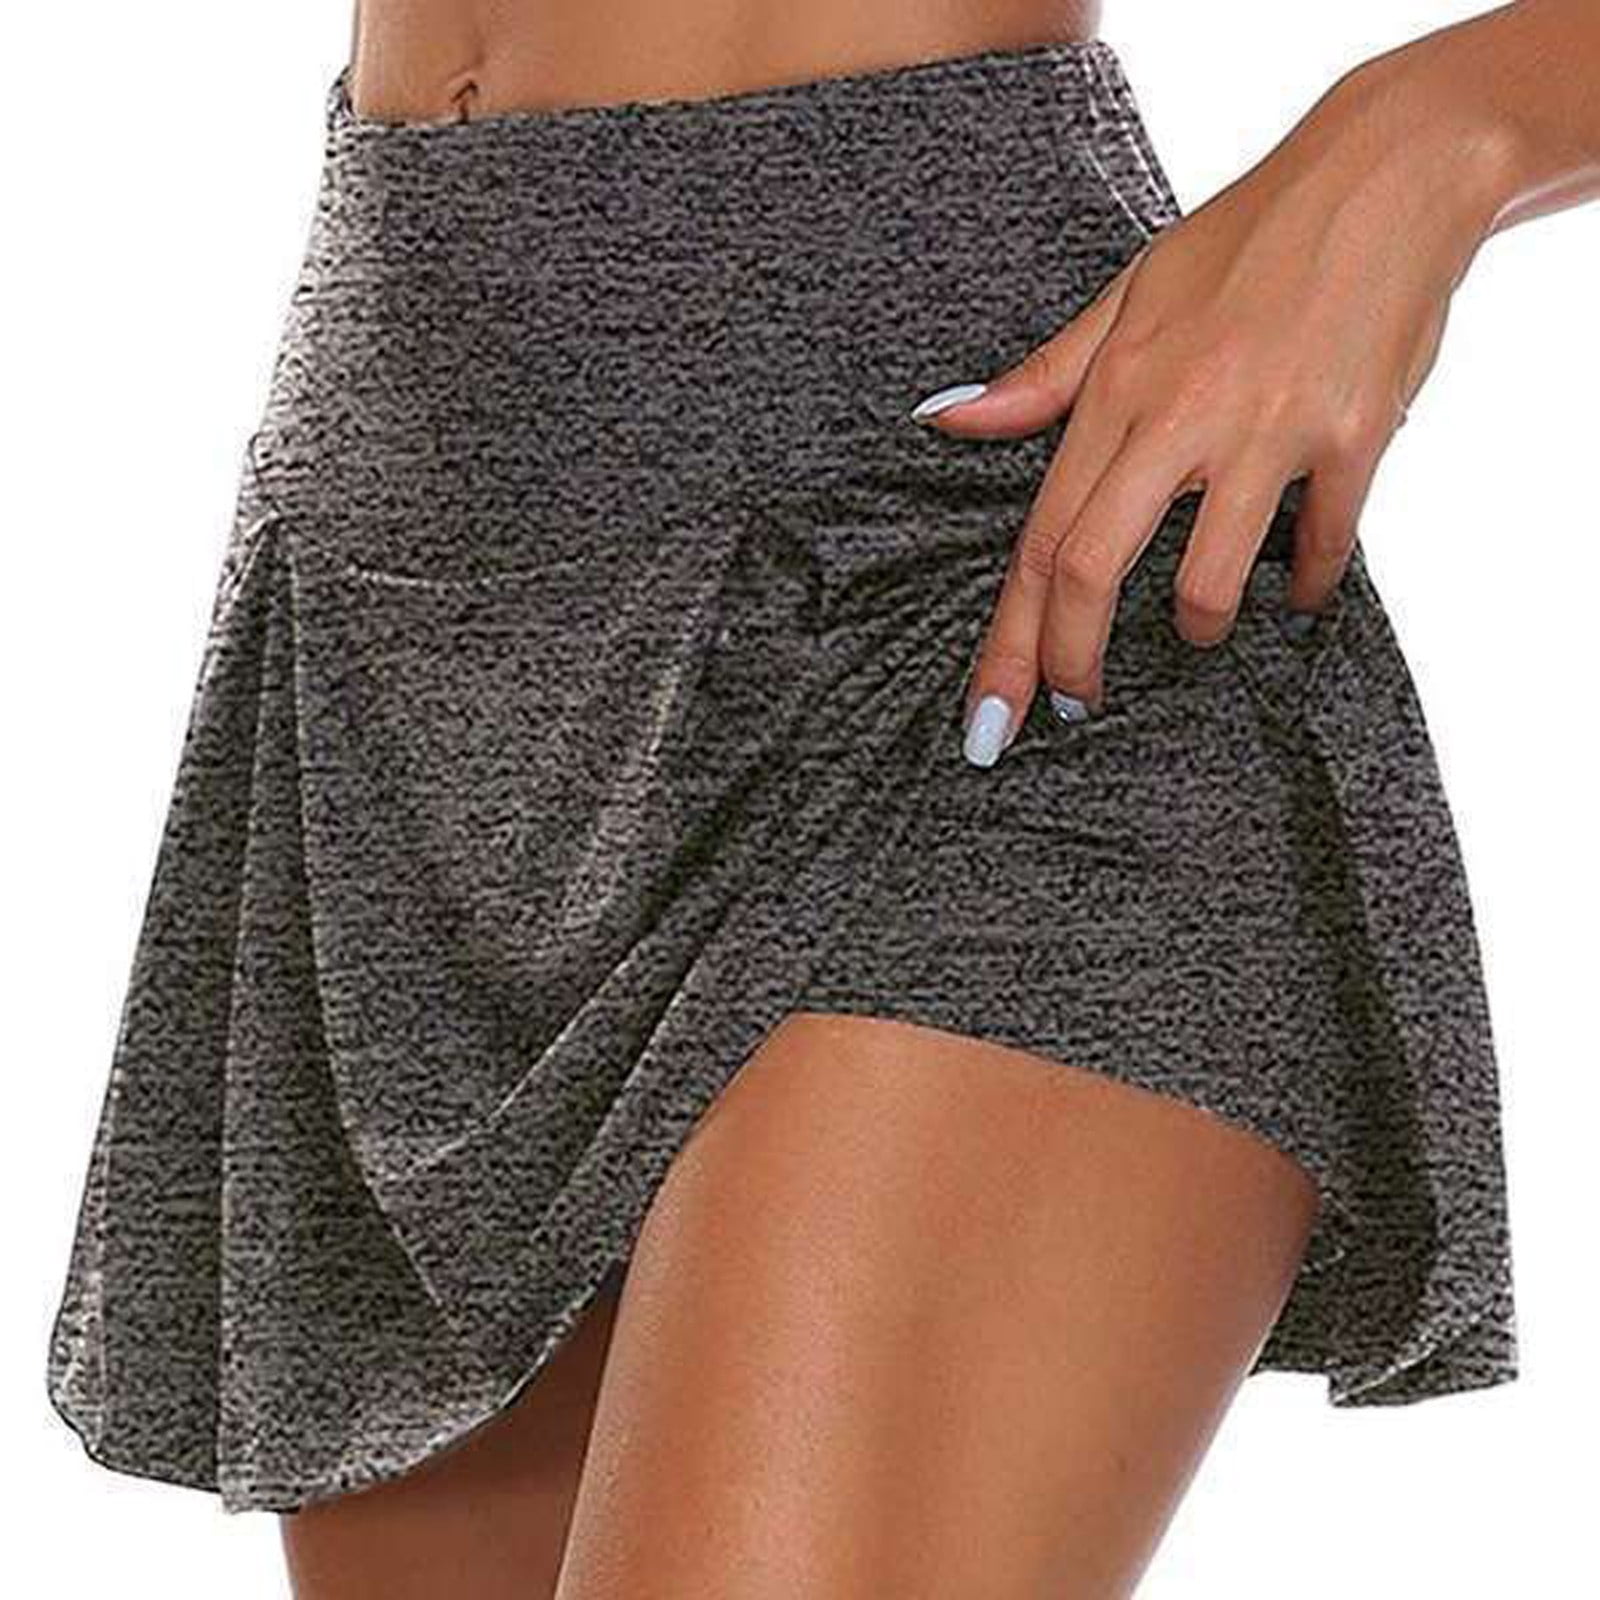 Best Sales! Gym Shorts Women, Athletic Shorts for Women, High Waisted Shorts,  That Girl Aesthetic Clothes, 80's Outfits for Women, Maternity Bike Shorts,  Cute Shortssummer 